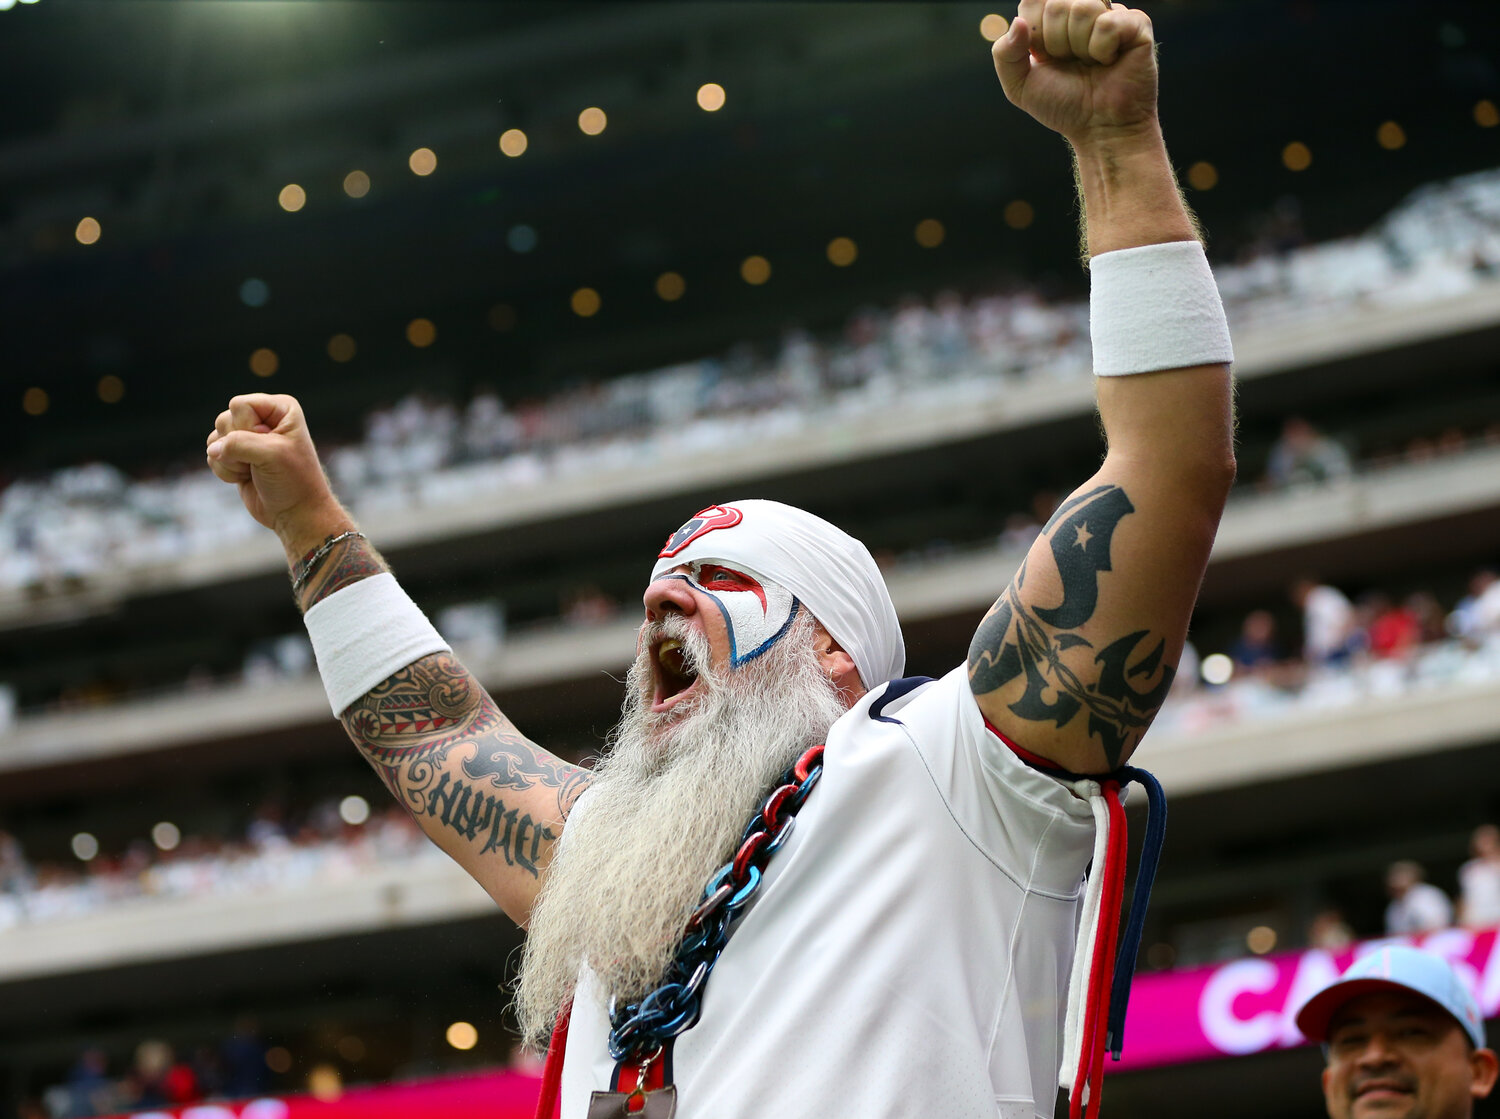 The Houston Texans “Ultimate Fan” during an NFL game between the Texans and the Colts on September 17, 2023 in Houston. The Colts won, 31-20.